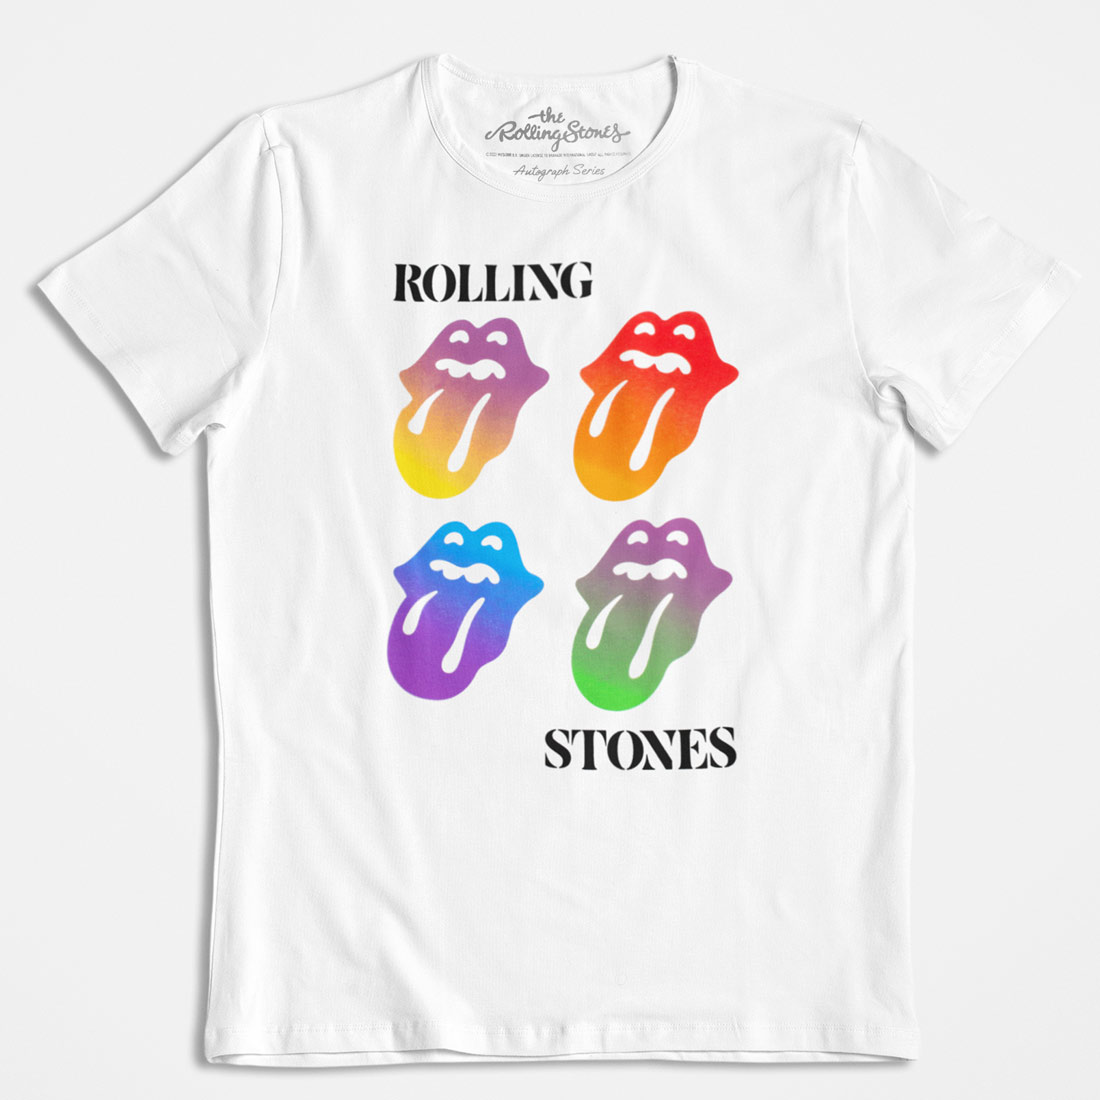 Rolling Stones Shortsleeve T-Shirt in White image number 3